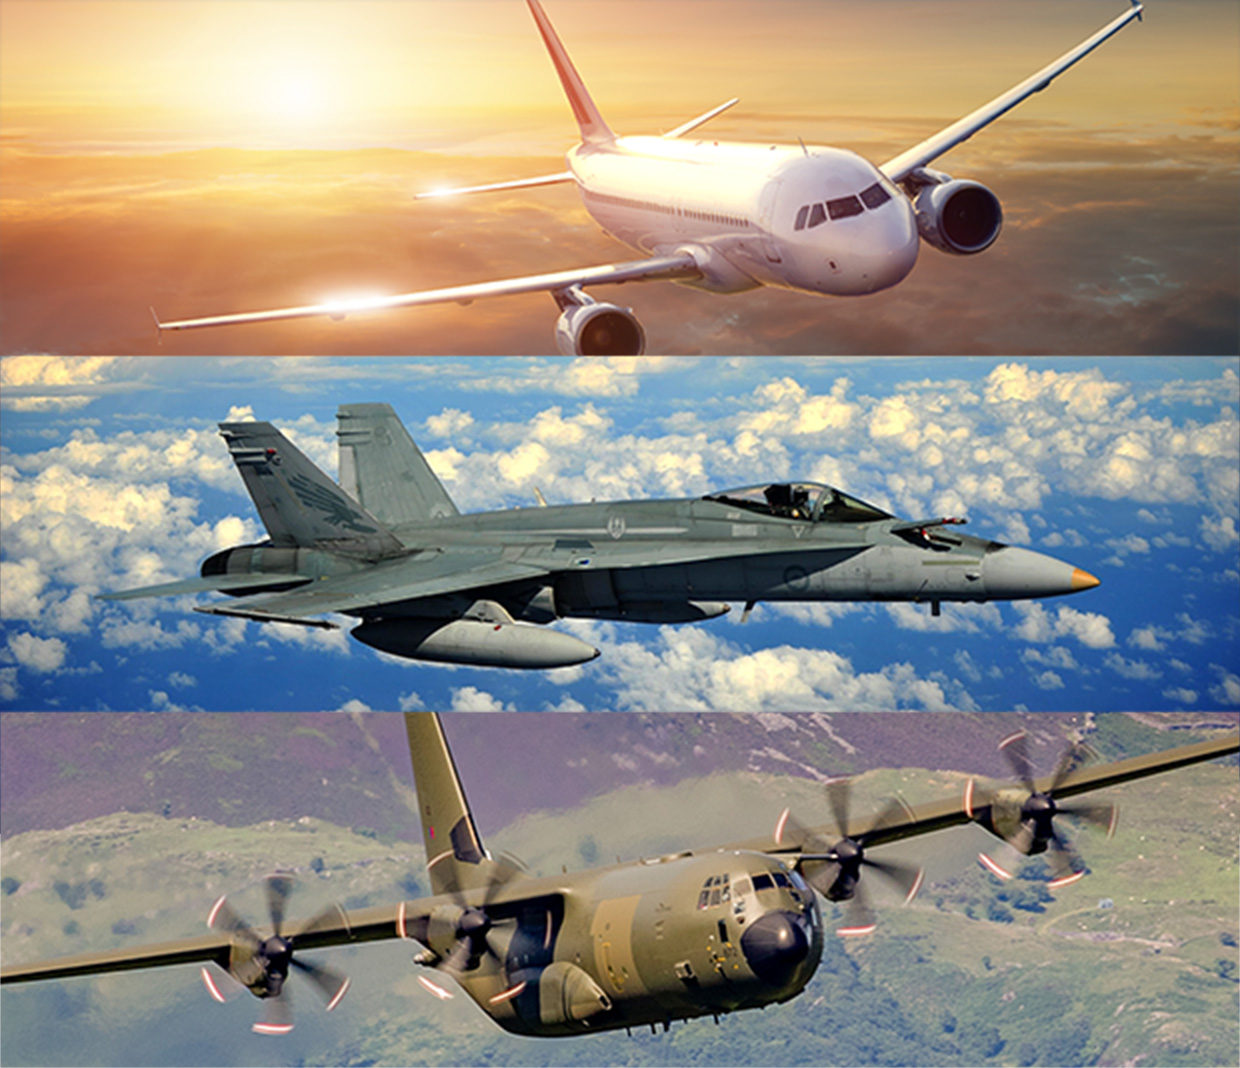 Three images of airplanes: the first is a commercial airline, the second is a fighter jet, and the third is a military cargo plane.